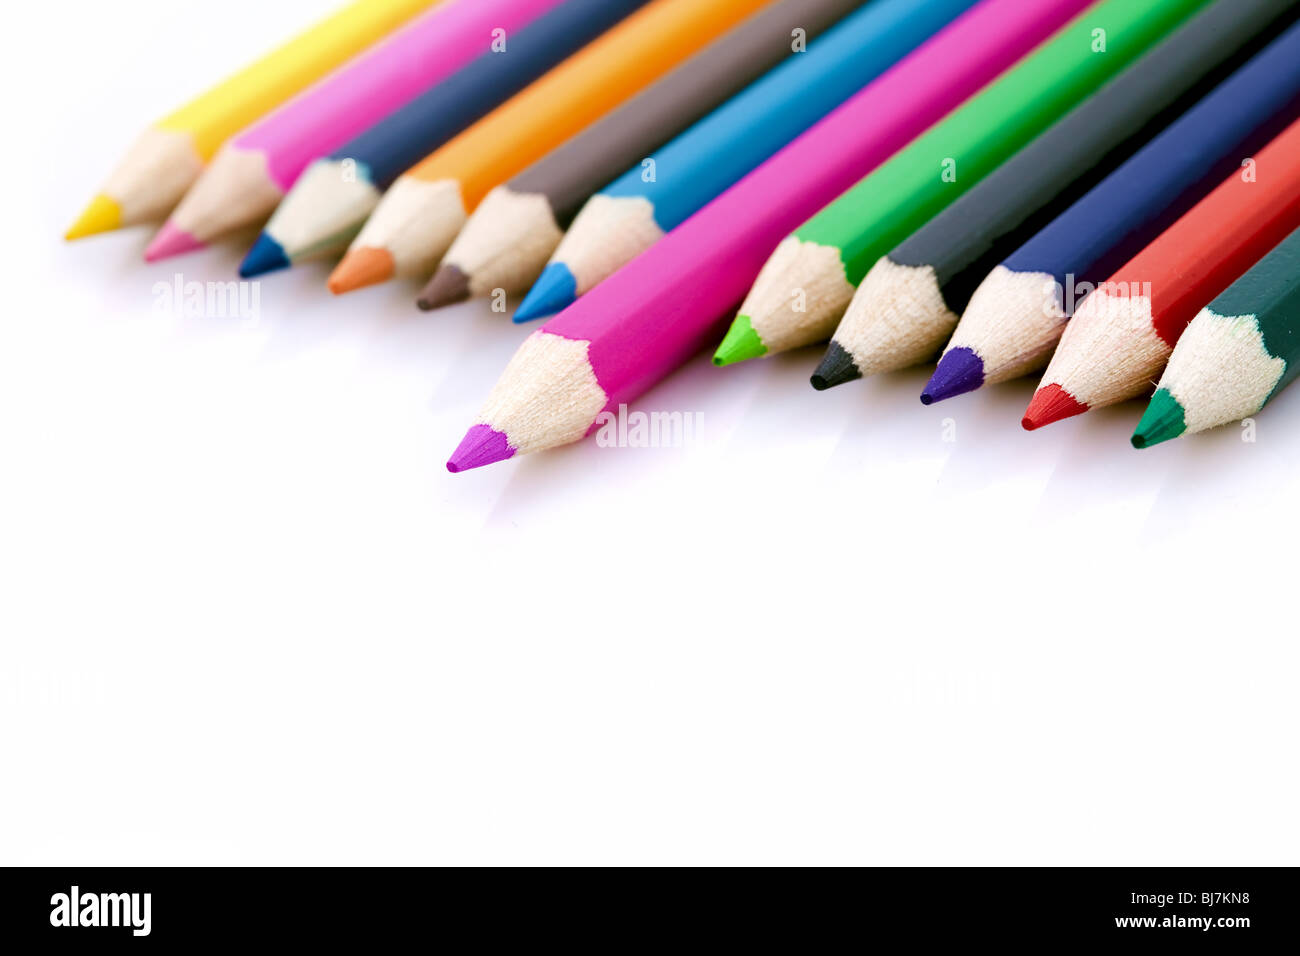 Winner or success metaphor with colorful pencils Stock Photo